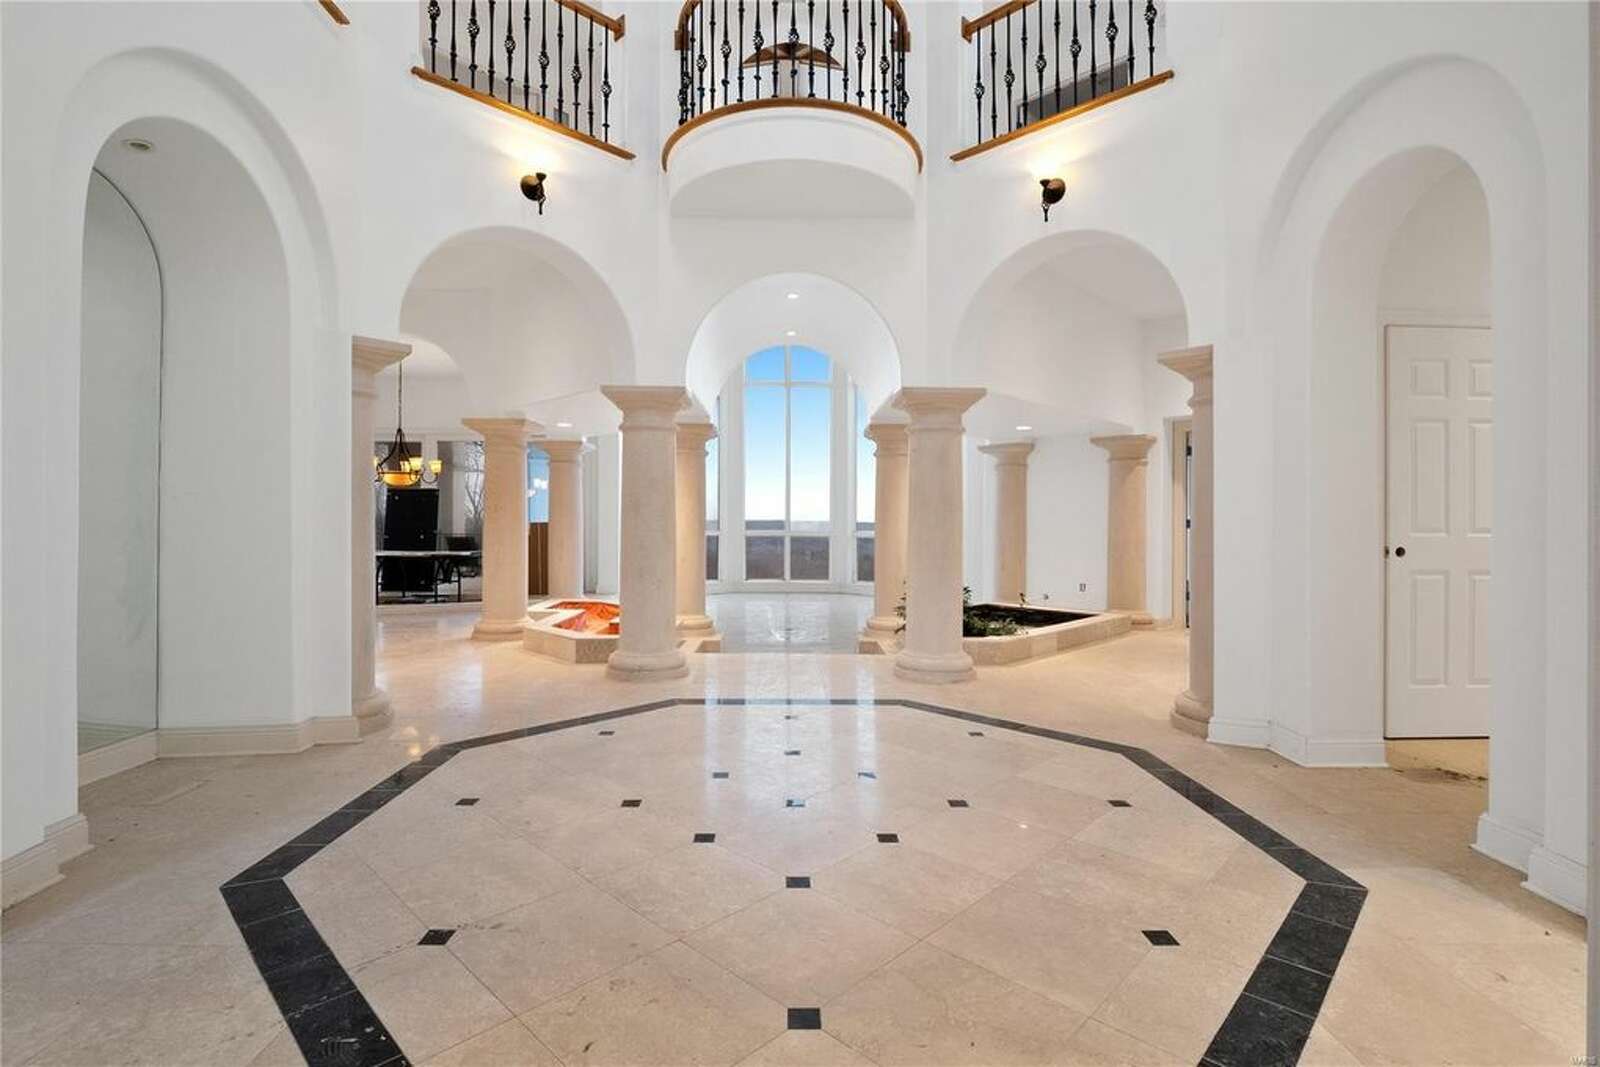 Look inside rapper Nelly's unfinished Missouri mansion that sold for less than $1M